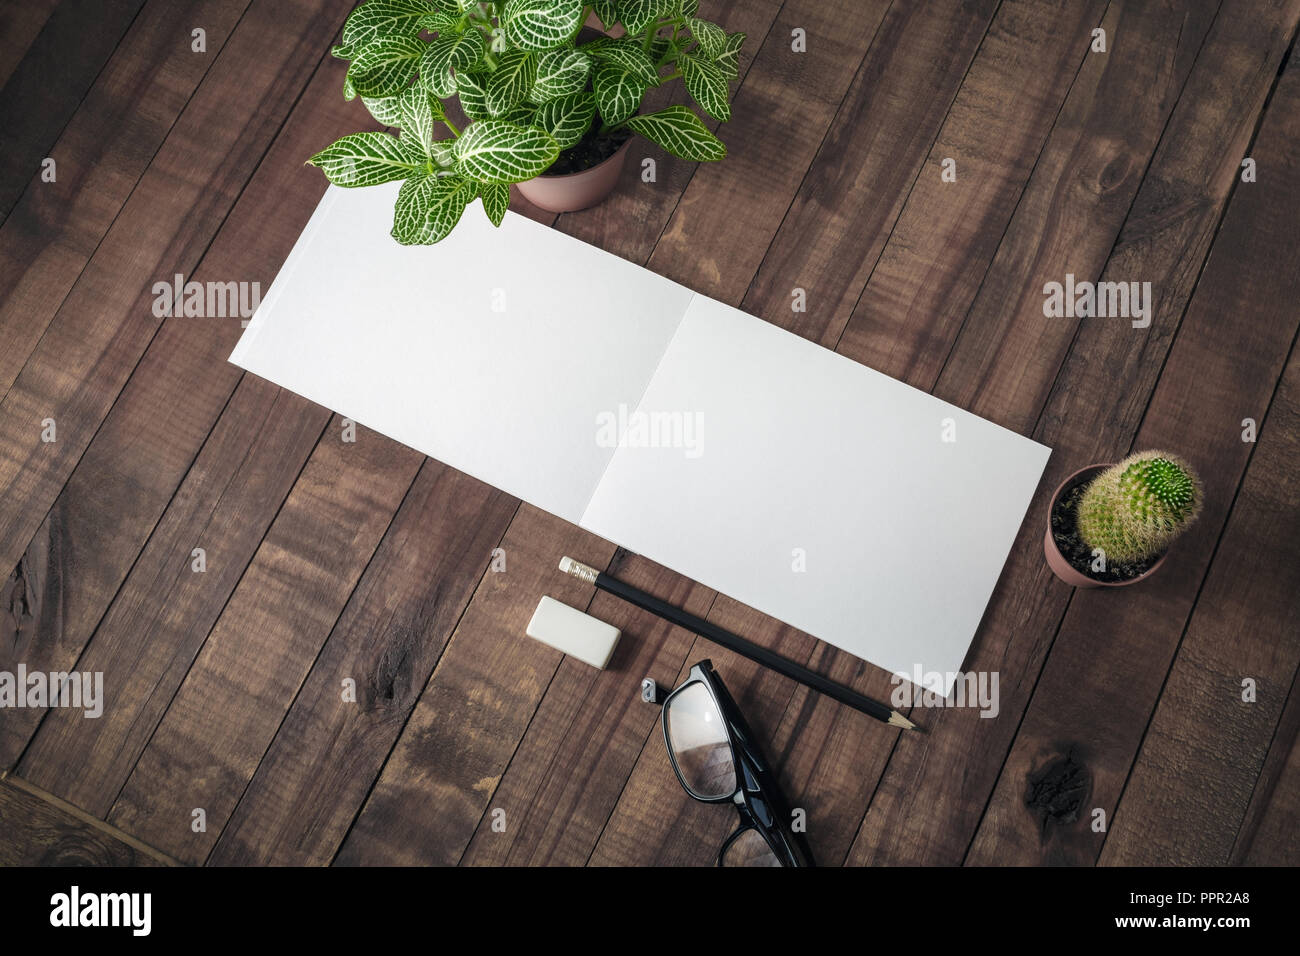 Blank stationery and plants on wooden background. Responsive design mockup. Stock Photo